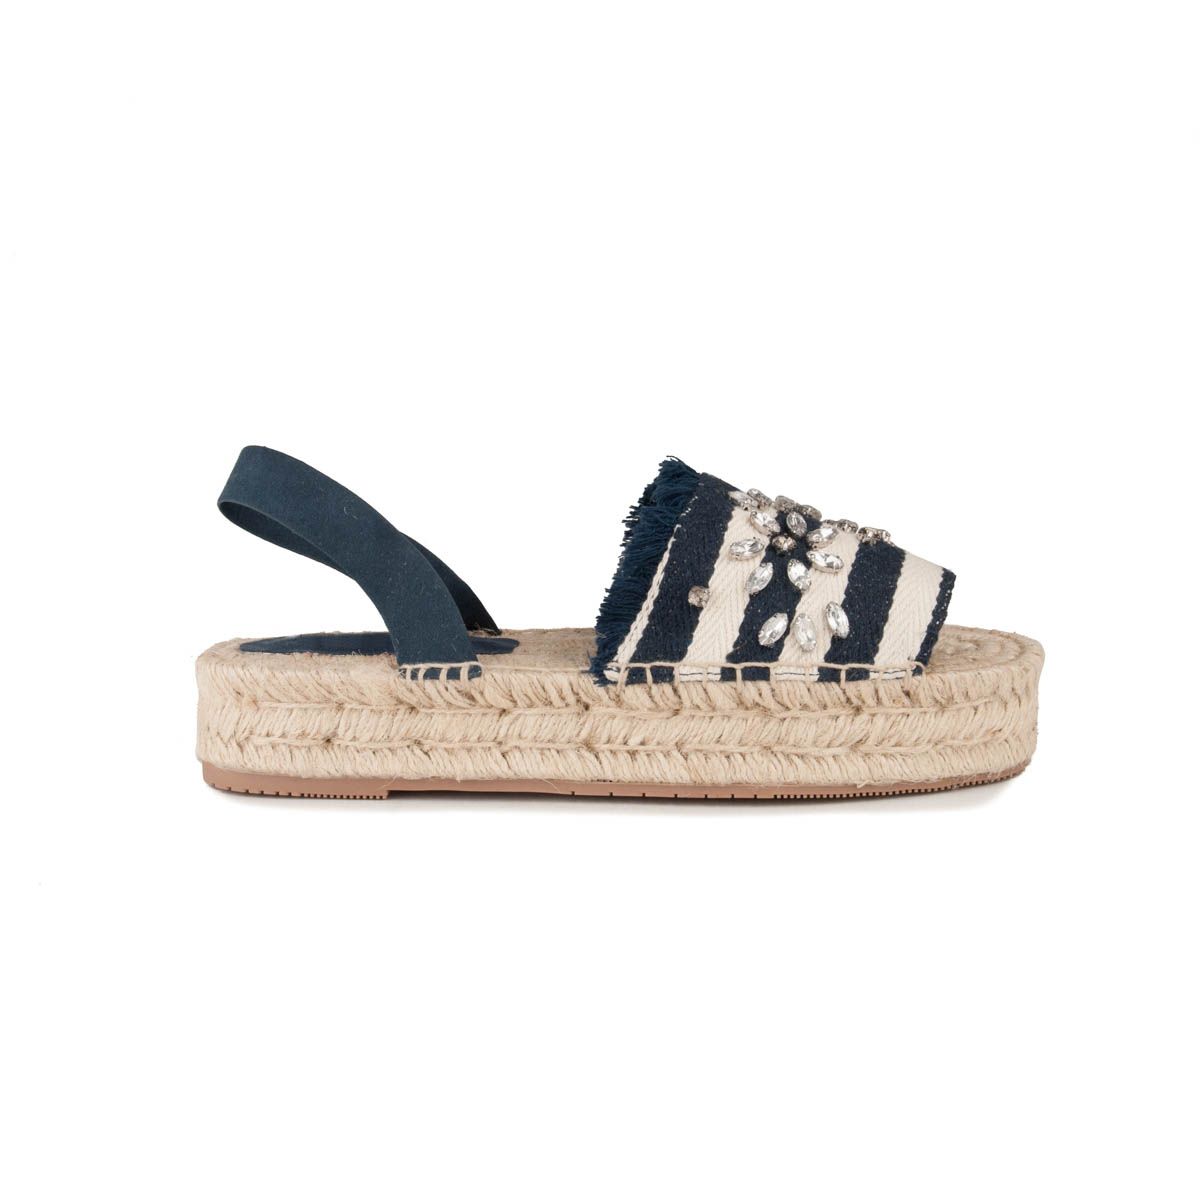 Great for summer thanks to its style and comfort. Unica and different thanks to its traditional Ibizan mix with the touch of platform and small stones. Natural and textile material for greater comfort and freshness in summer. Anti-slip rubber patin that covers the entire esparto sole. 4 cm platform.